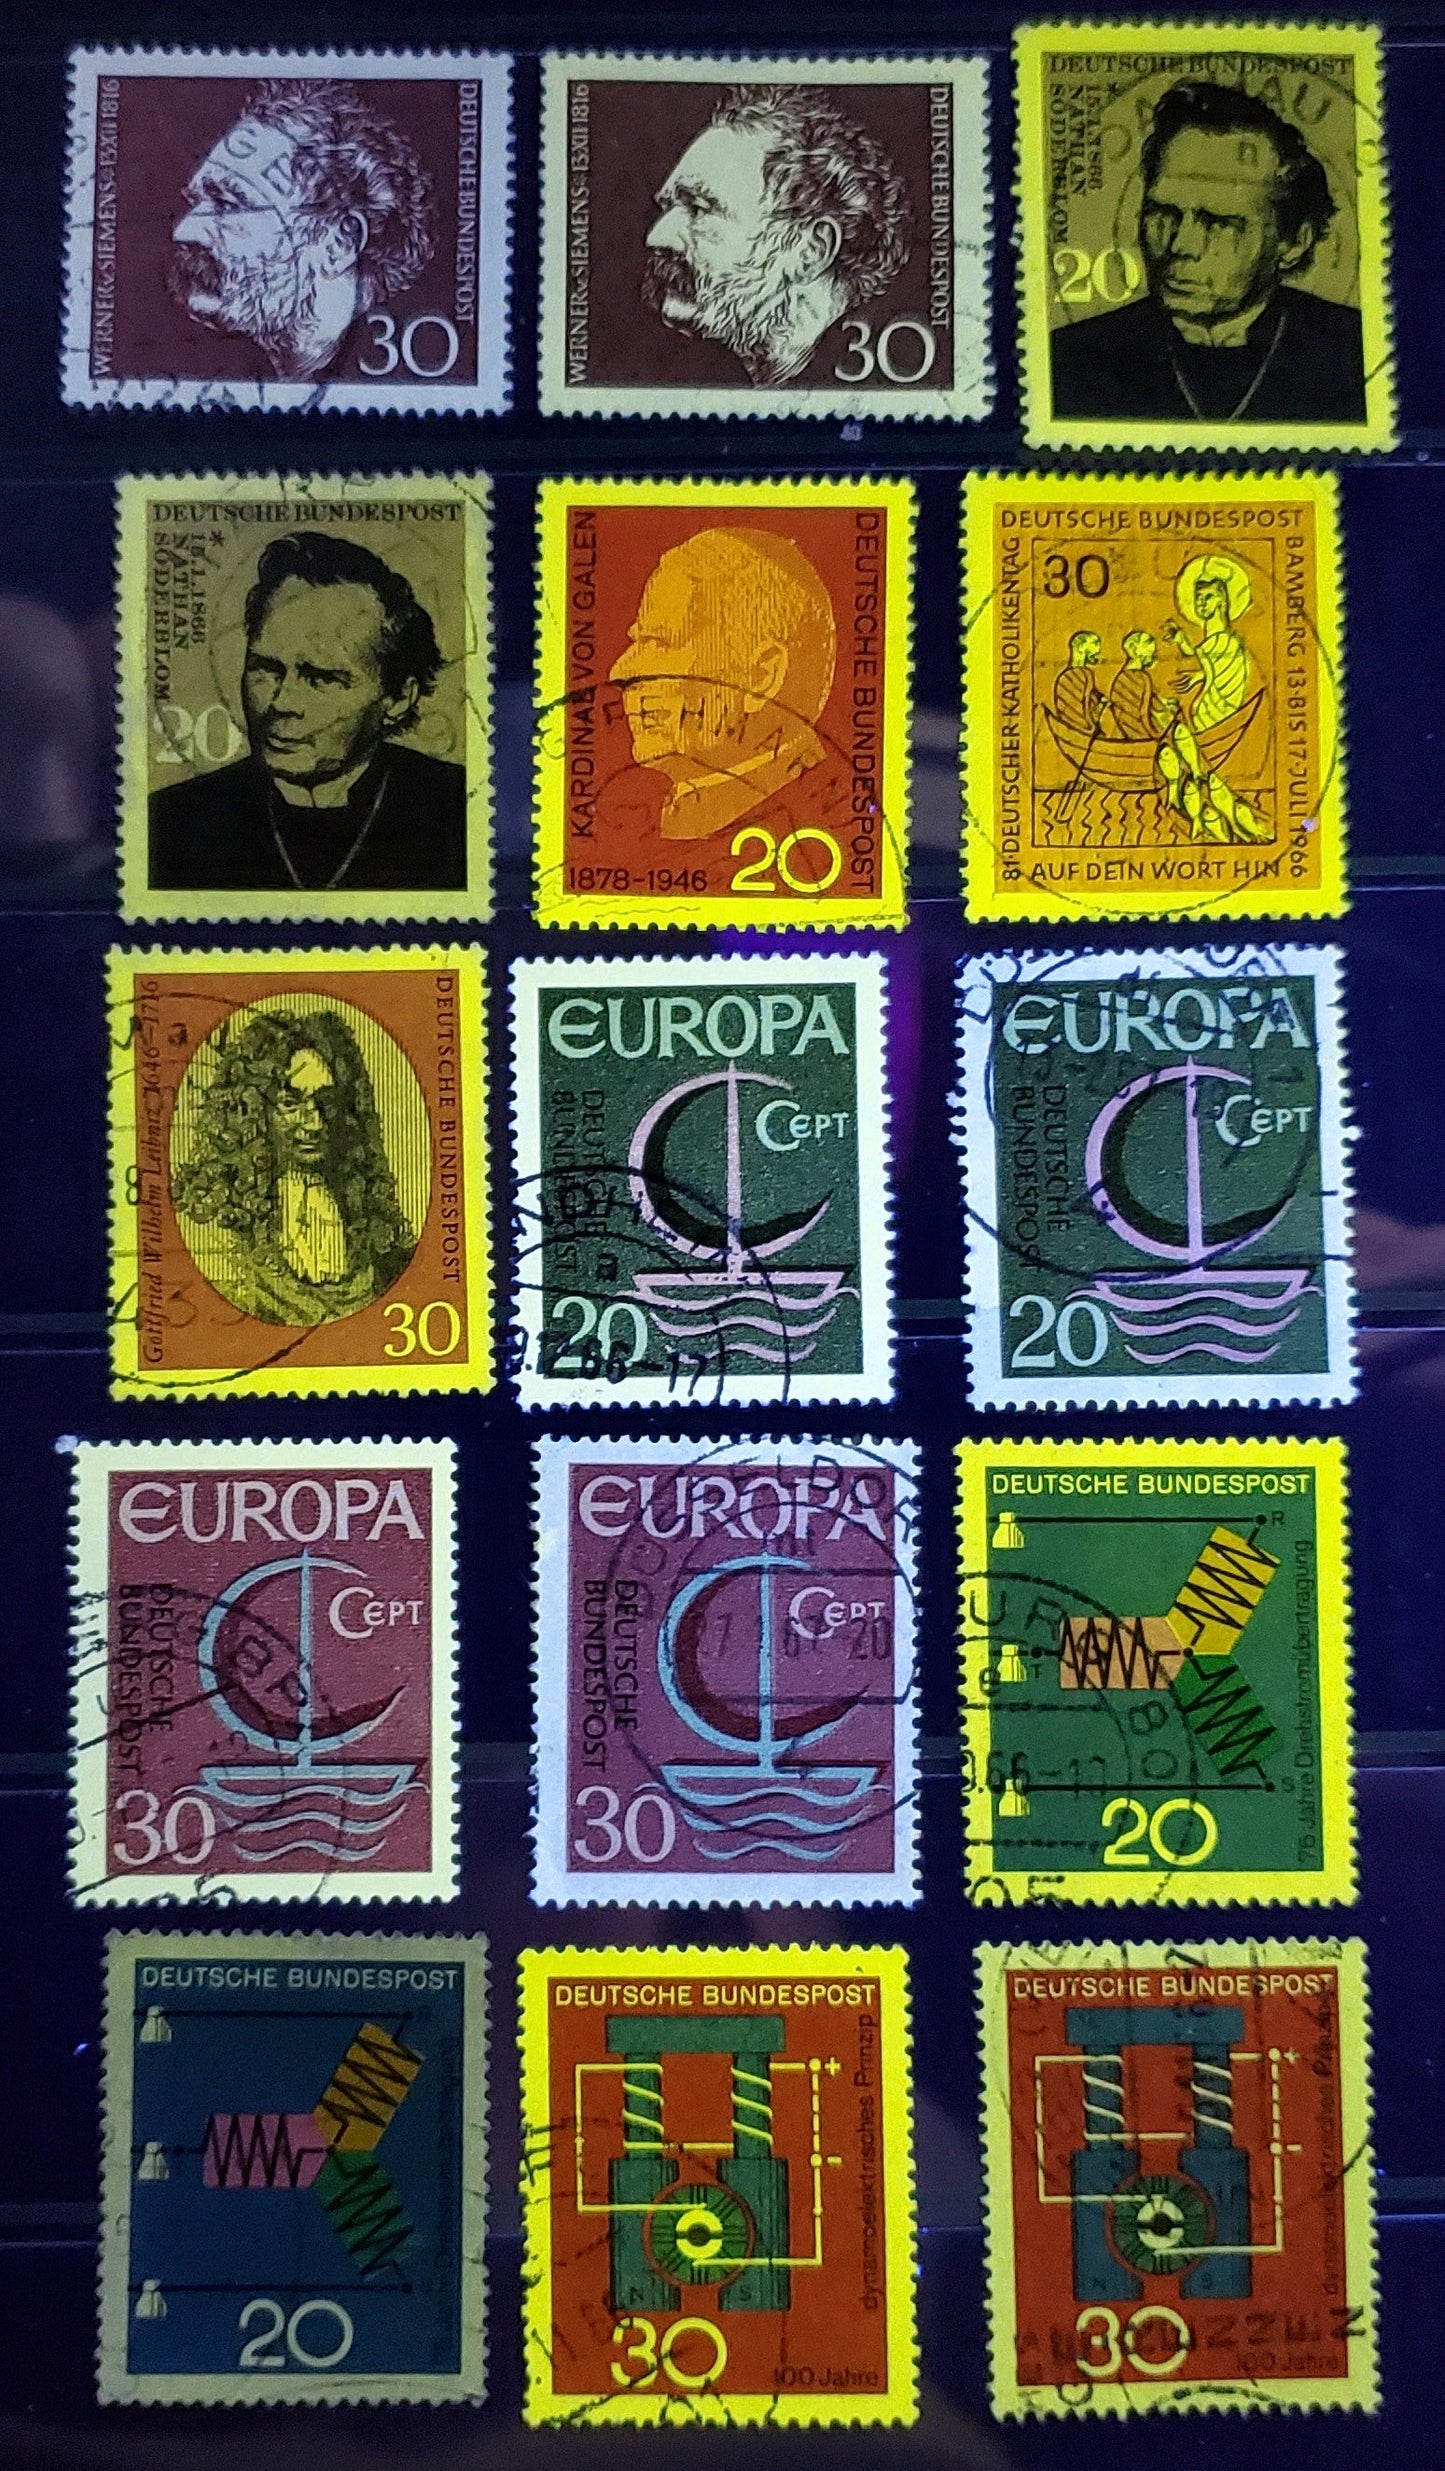 Lot 97 Germany Mi#504 (SC#959)/528 (SC#968) 1966 Commemoratives, With Additional Paper Fluorescence Varieties, 15 Very Fine Used Singles, Click on Listing to See ALL Pictures, Estimated Value $5